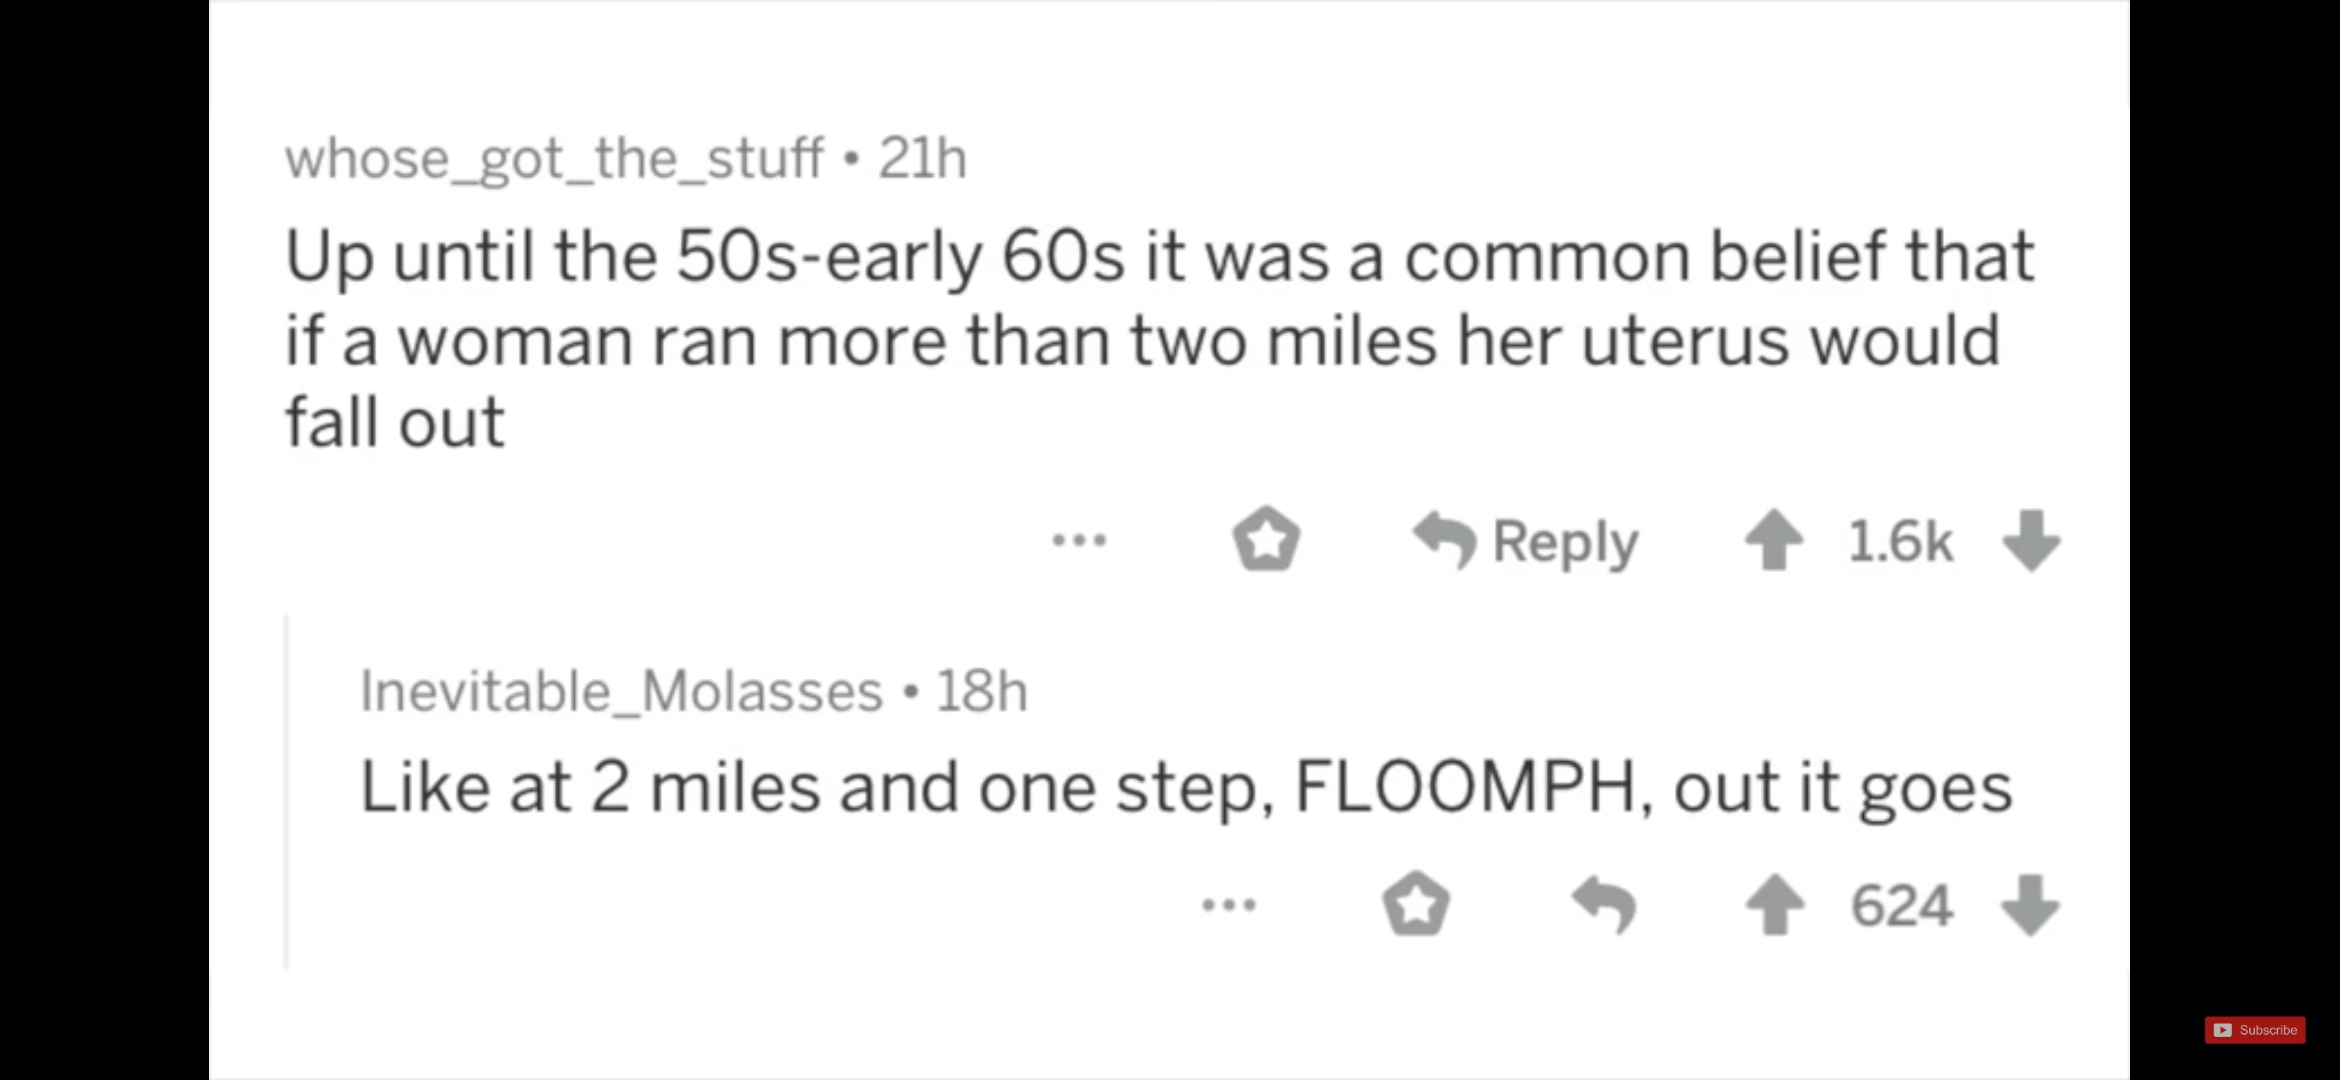 whose_got_the_stuff. 21h Up until the 50searly 60s it was a common belief that if a woman ran more than two miles her uterus would fall out ... Inevitable_Molasses 18h at 2 miles and one step, Floomph, out it goes ... 4 624 Subscribe